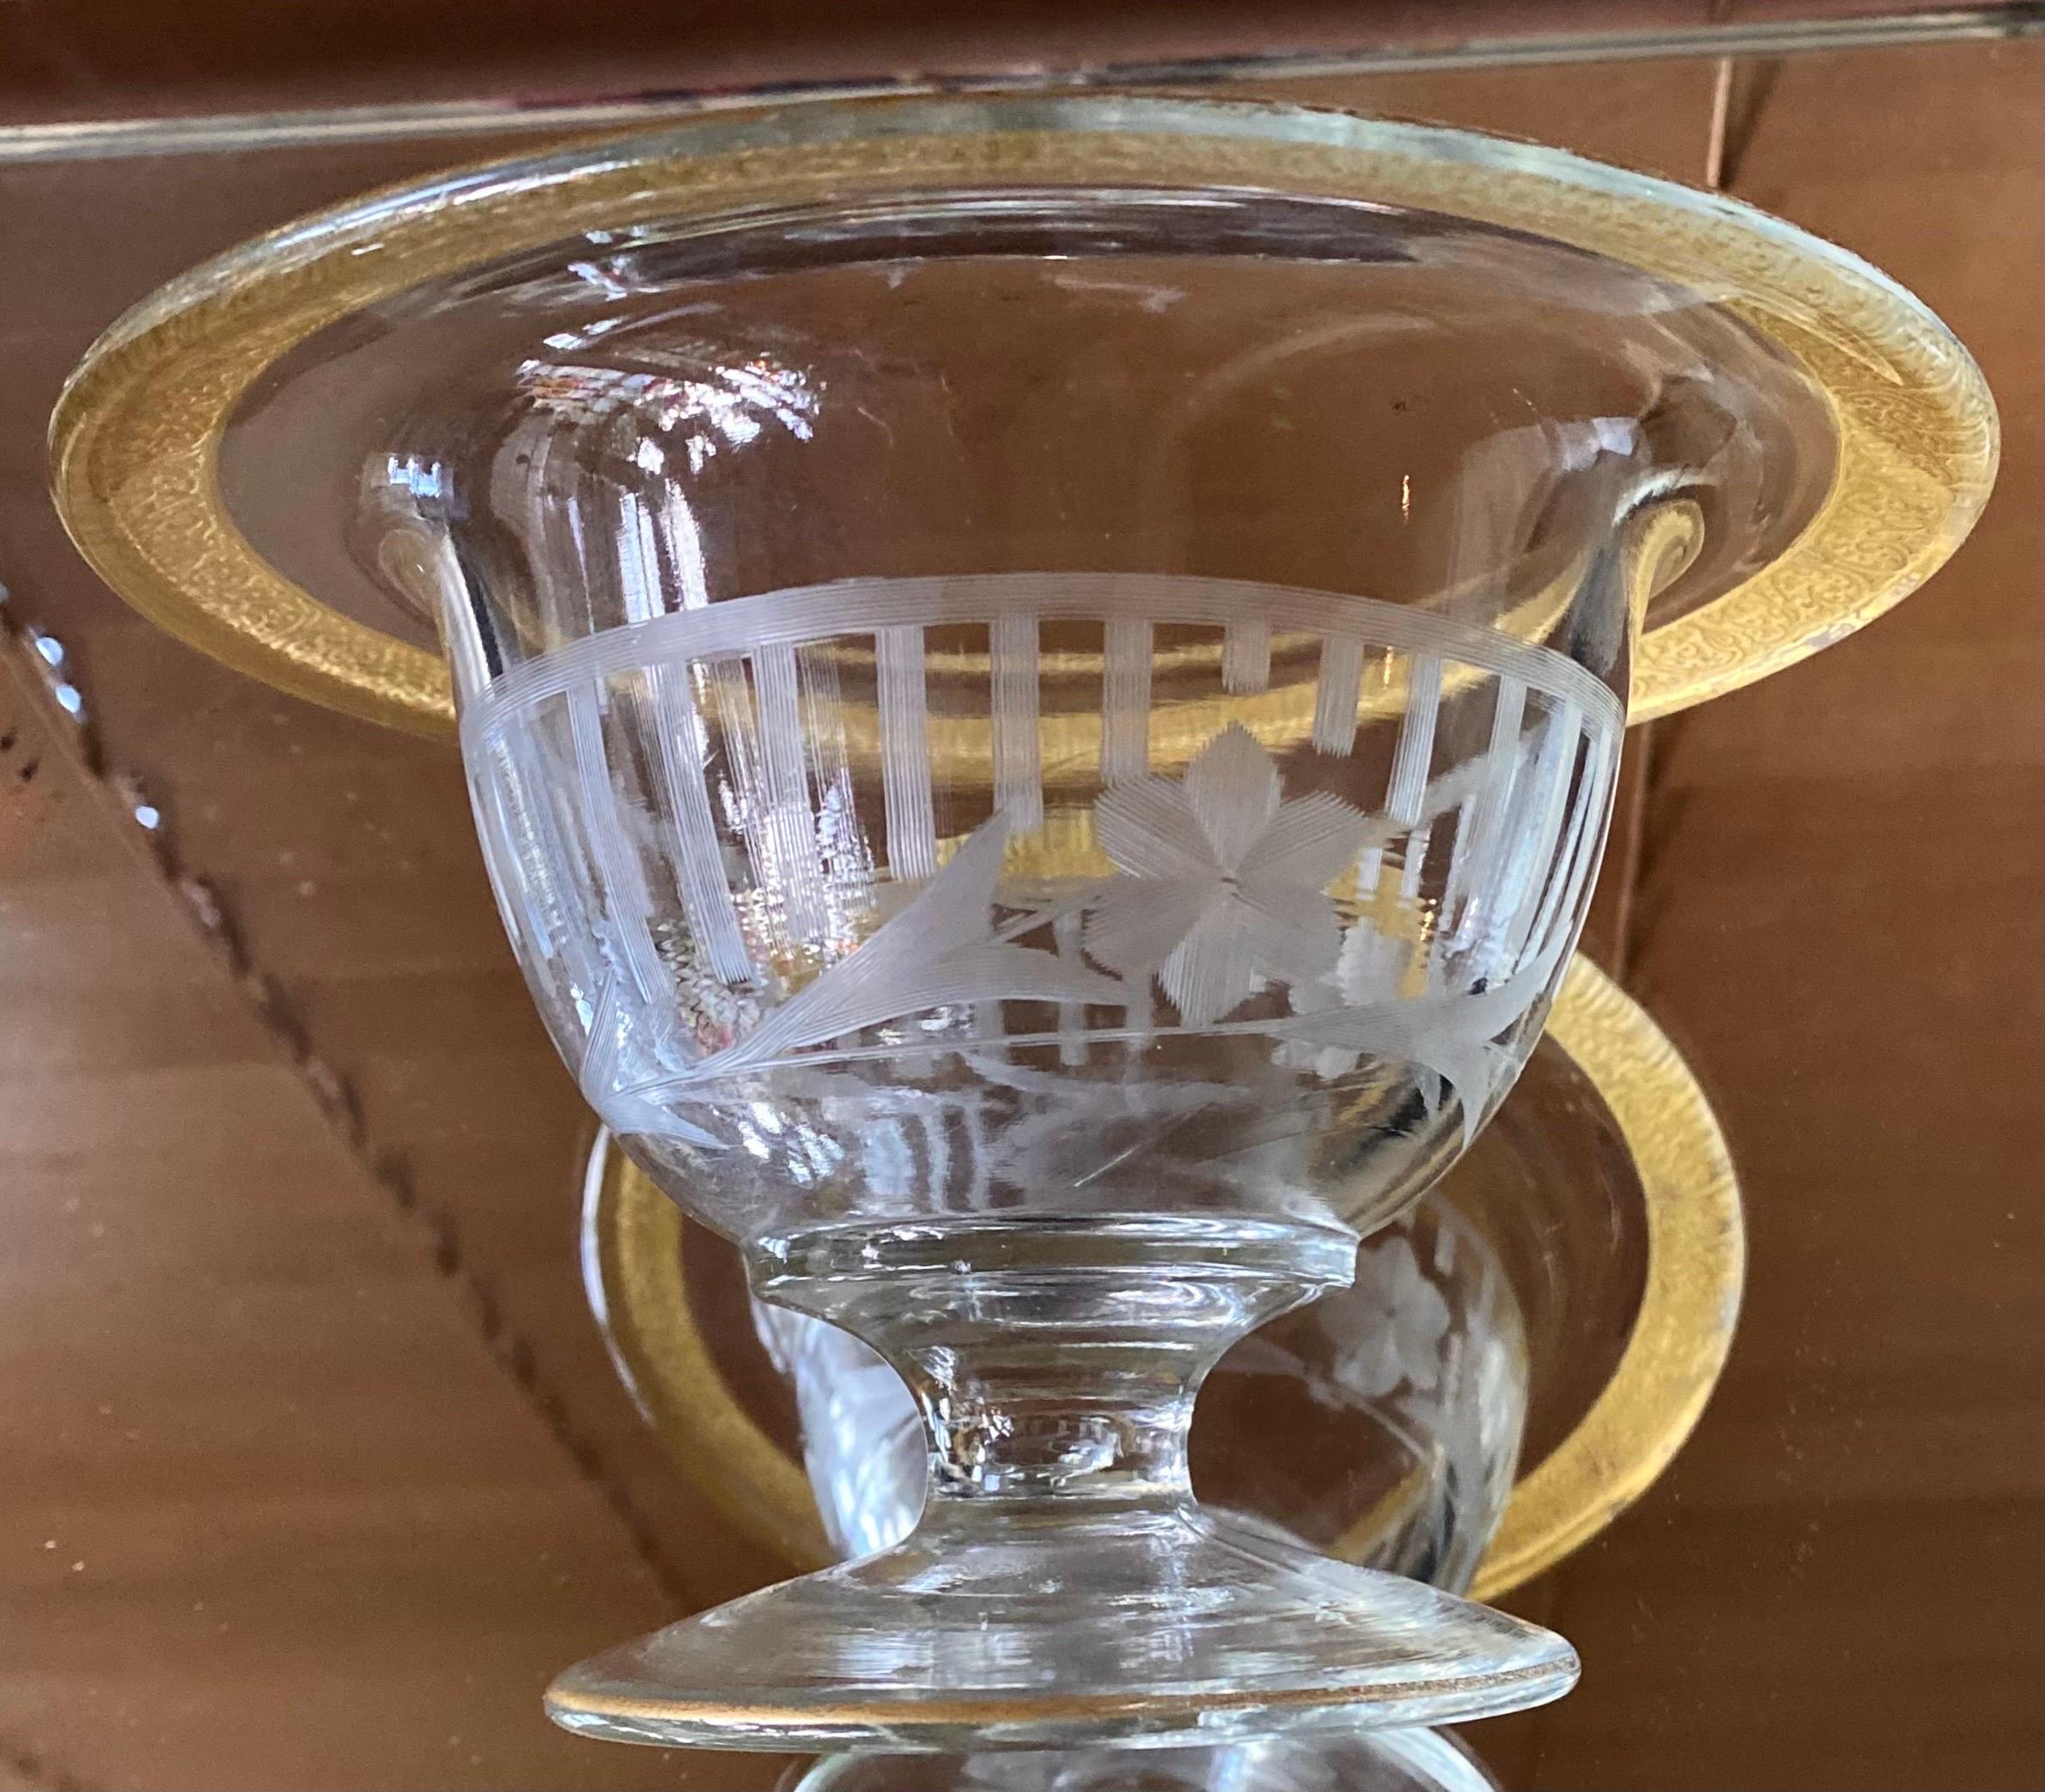 Etched Antique Cut Glass Footed Compote Dish With Chased Gold Florentine Trim. For Sale